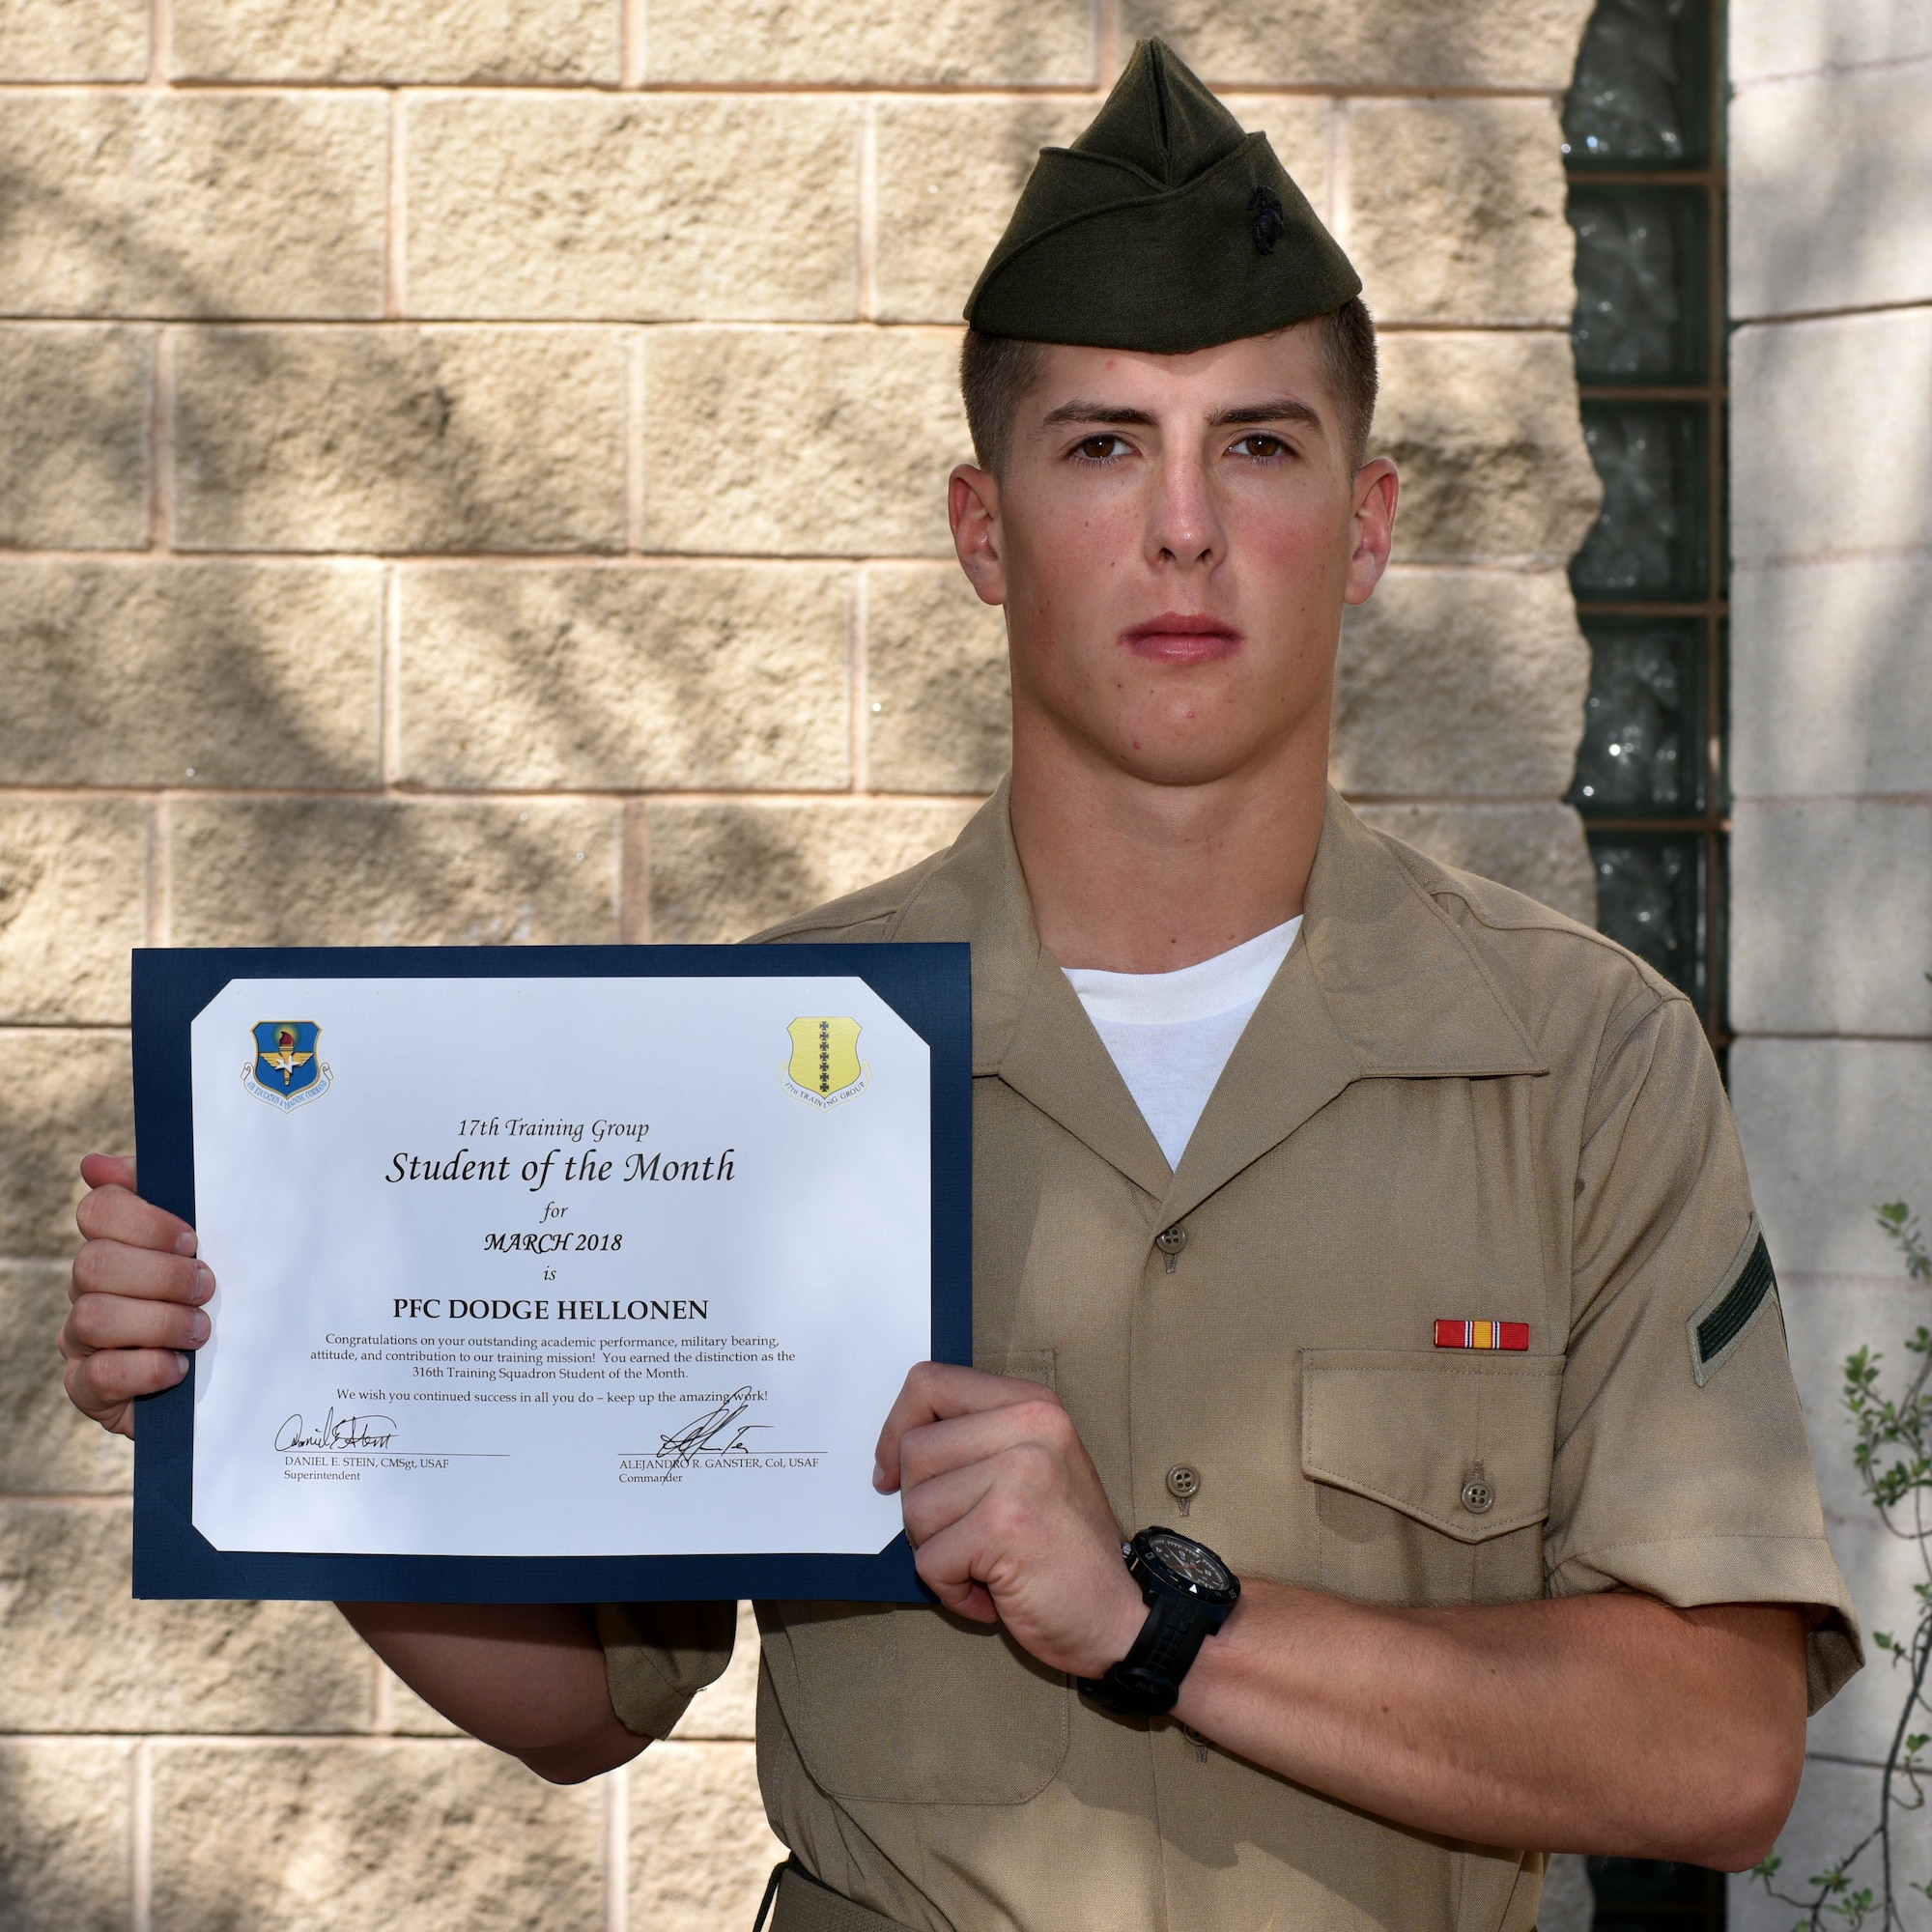 17th Training Group Student of the Month for March 2018, U.S. Marine Corps Pfc. Dodge Hellonen, Marine Corps Detachment at Goodfellow trainee, stands outside the Event Center on Goodfellow Air Force Base, Texas, April 6, 2018. Hellonen is the Goodfellow Student of the Month spotlight for March 2018, a series highlighting Goodfellow students. (U.S. Air Force photo by Senior Airman Randall Moose/Released)